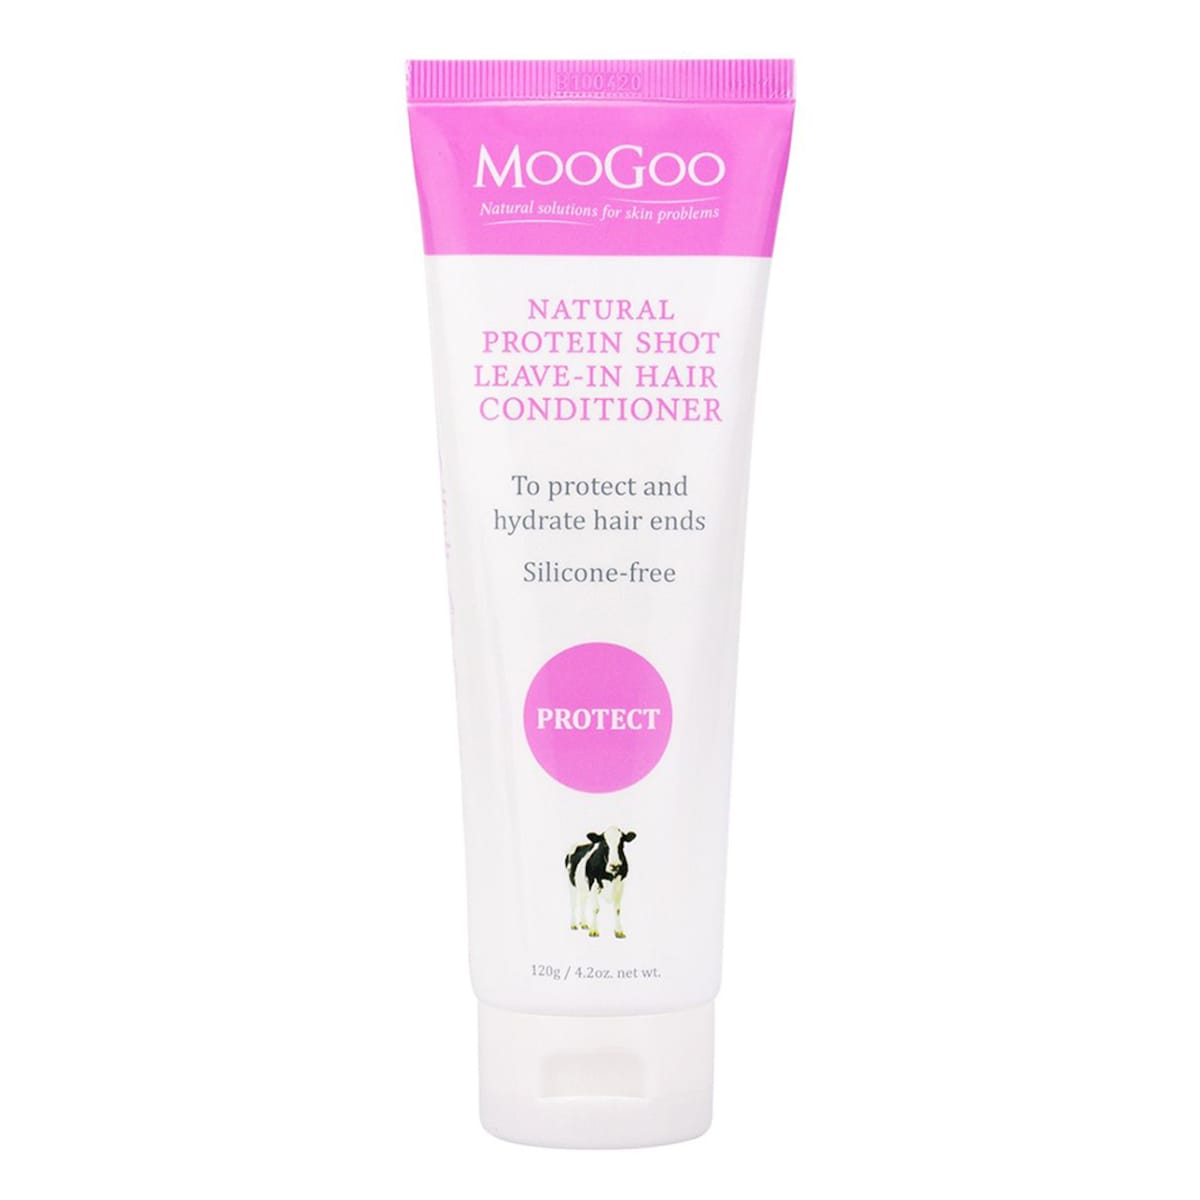 MooGoo Protein Shot Leave-in Conditioner 120g